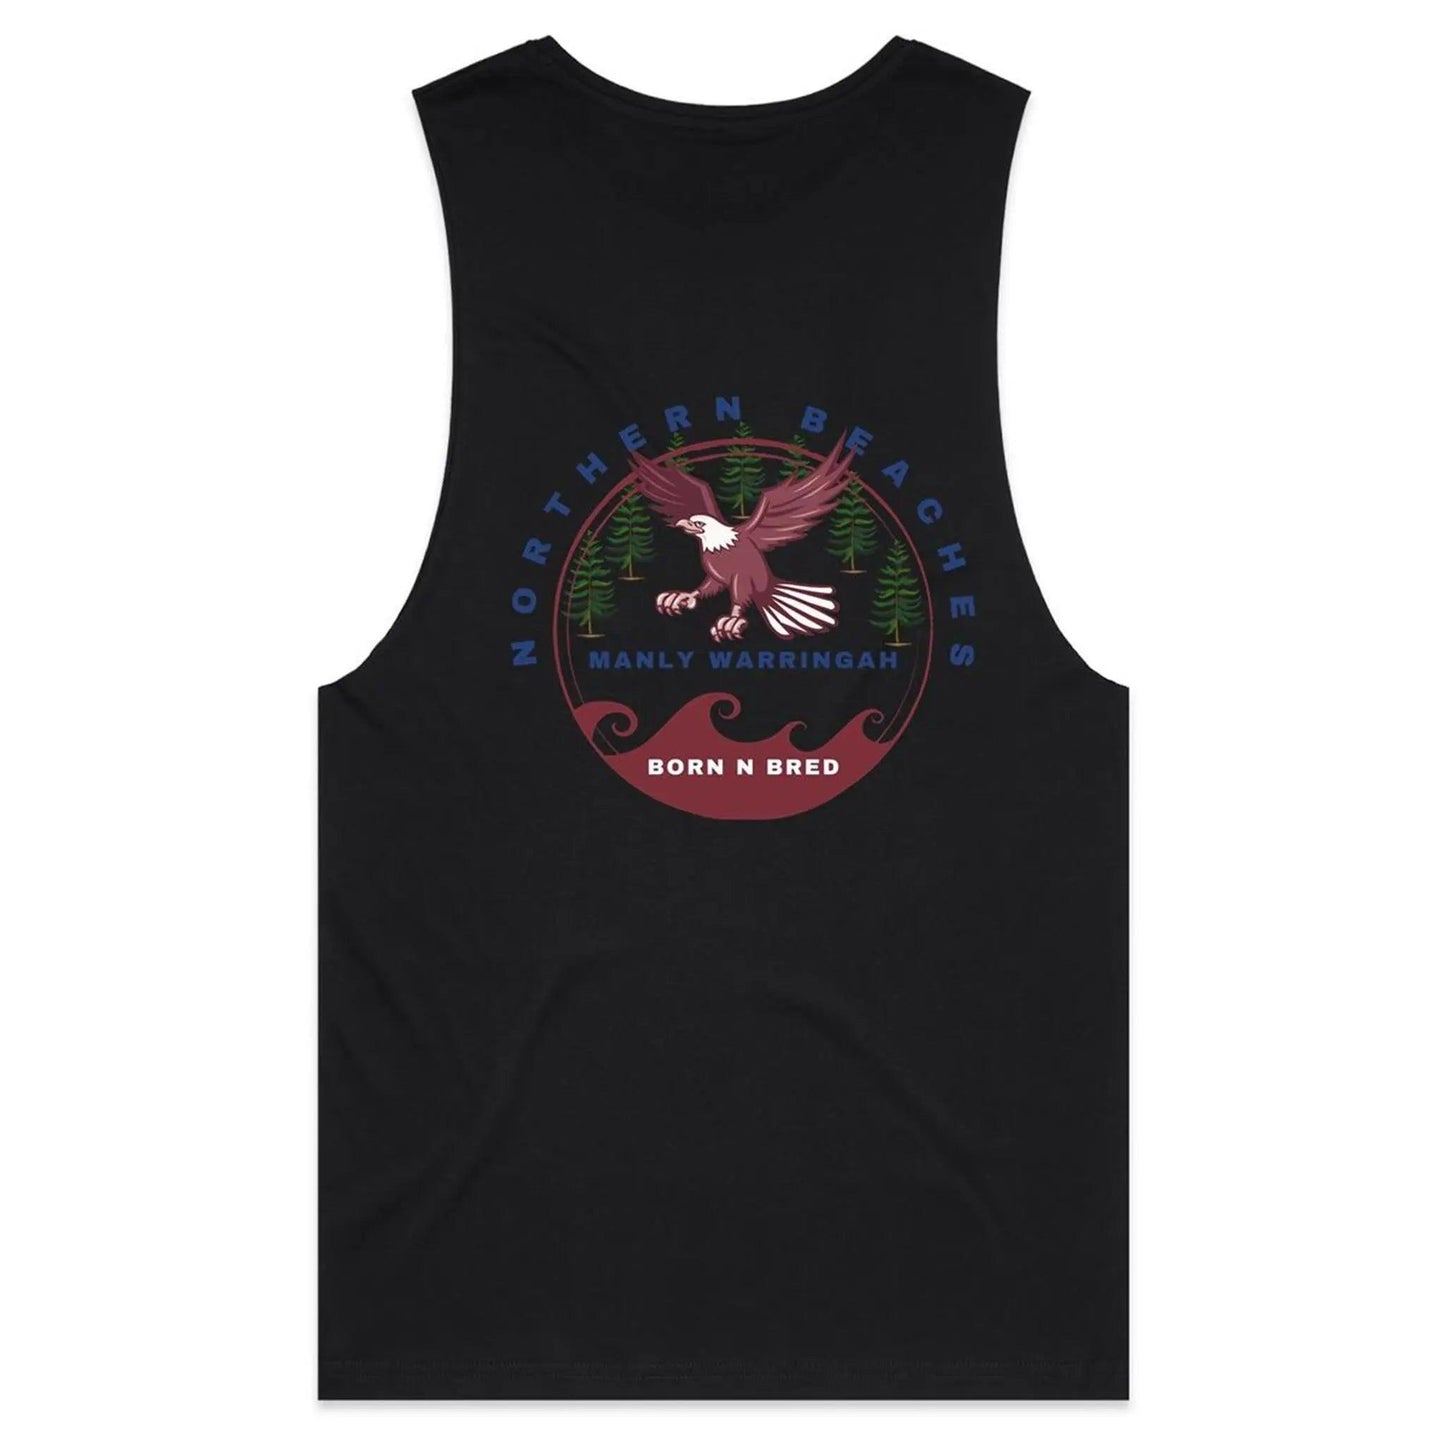 Tank Top Tee Northern Beaches Manly Warringah BornNBred logo on back